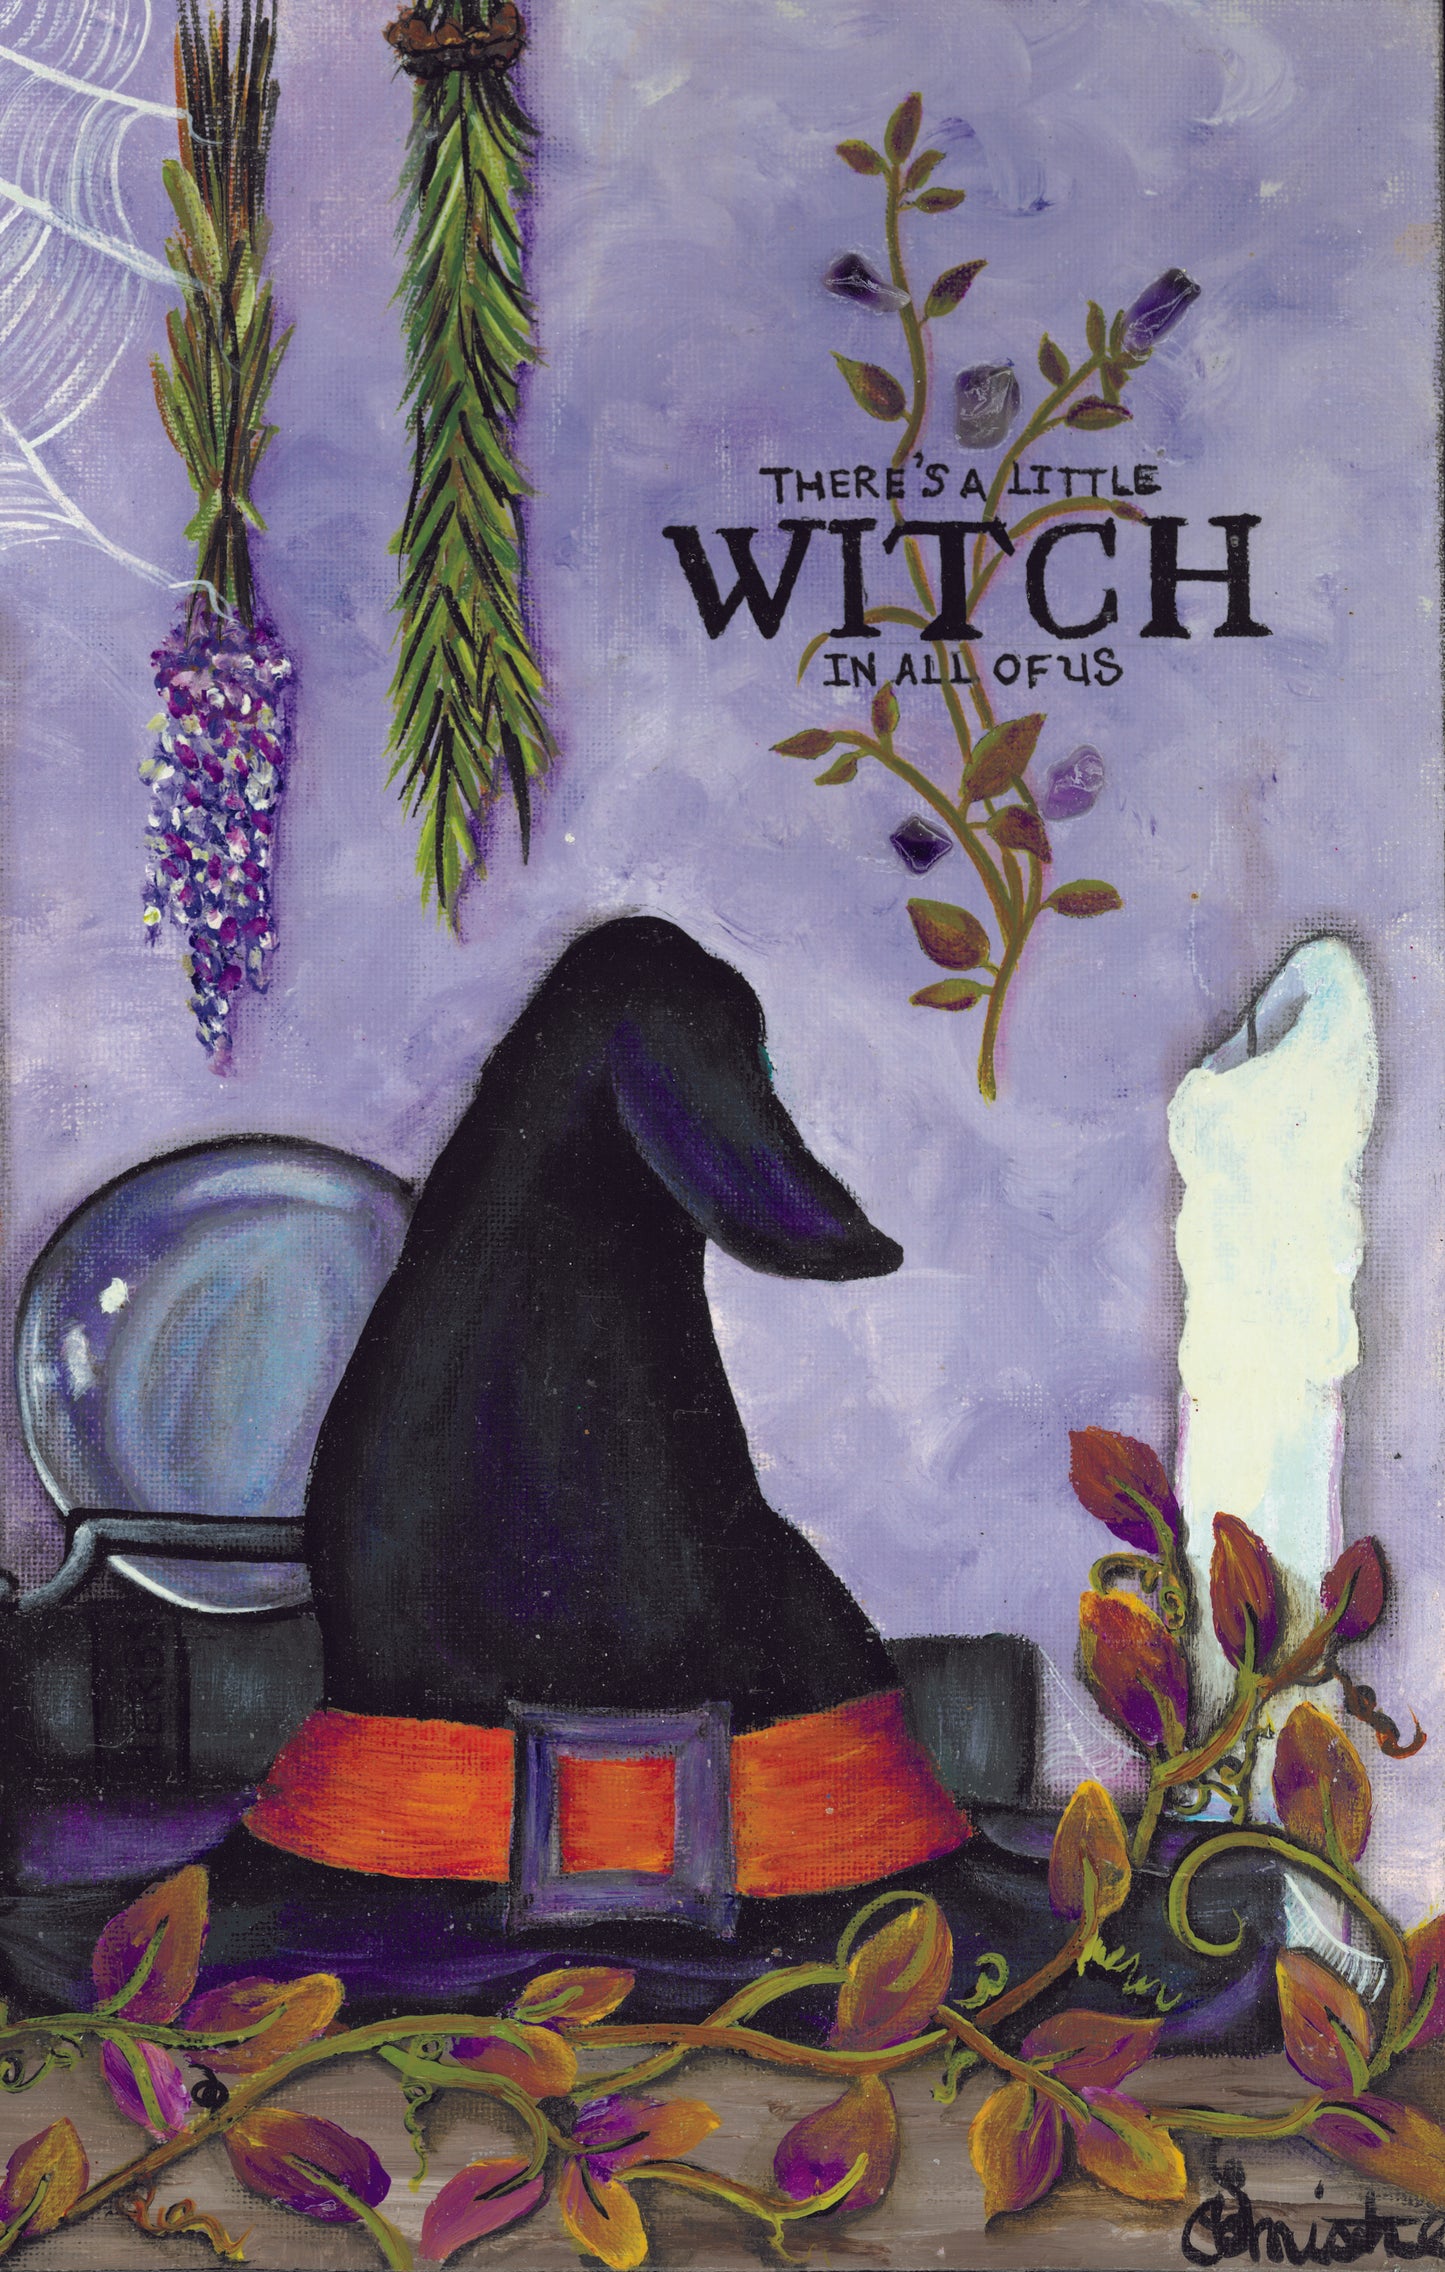 Samhain Journal - There’s a Little Witch in All of Us! 8.5" x 11"